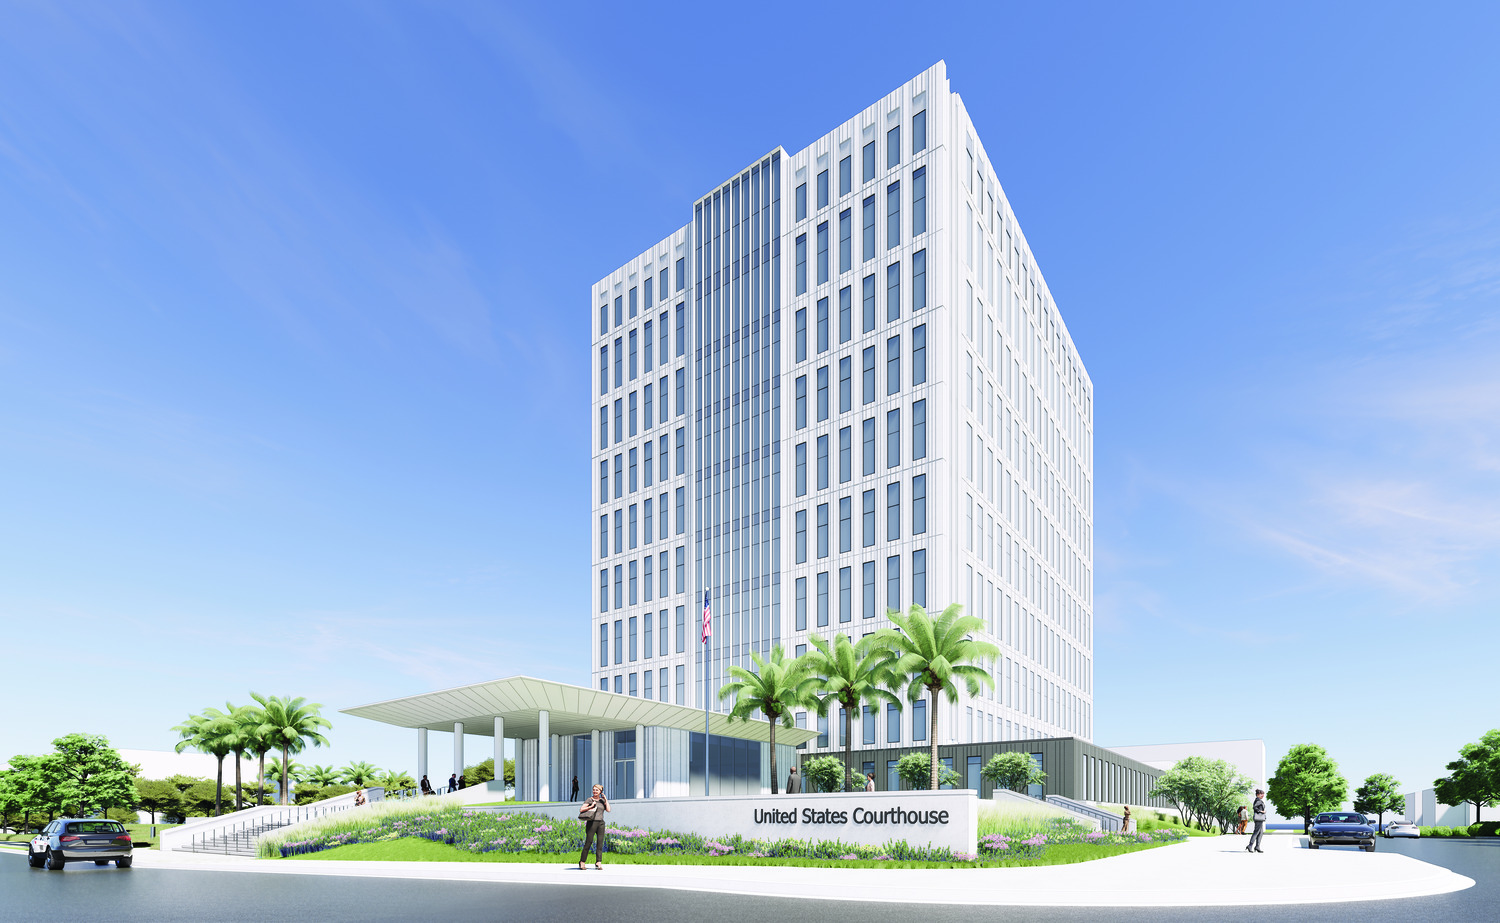 Ch 4 - page 7 - Ch 115 optton 

U.S. Courthouse Fort Lauderdale - RENDERING